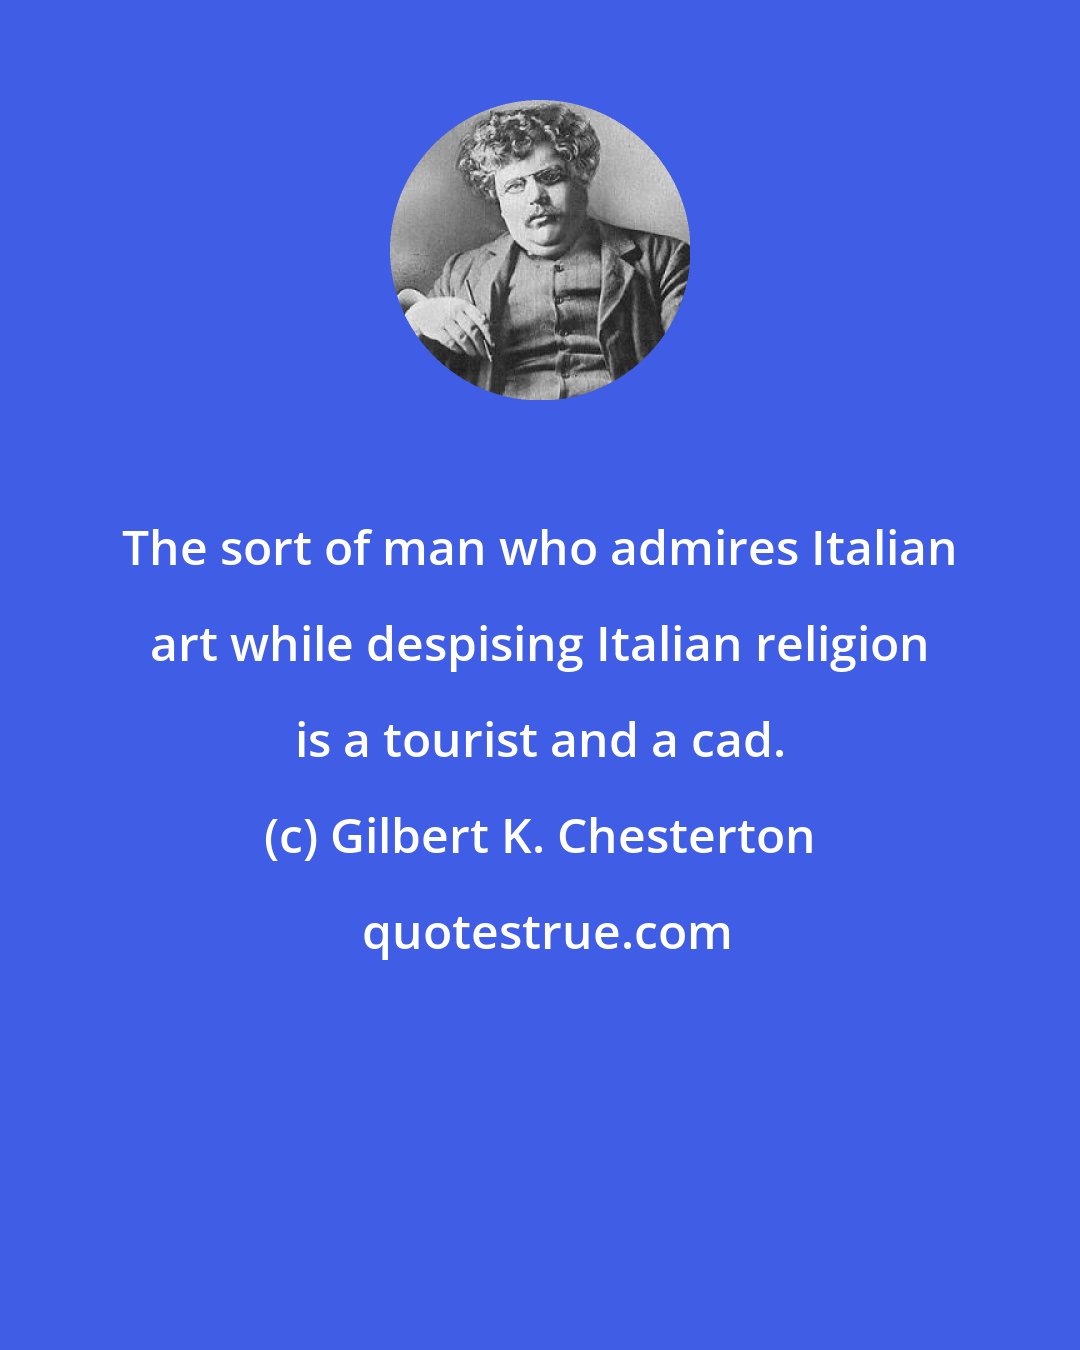 Gilbert K. Chesterton: The sort of man who admires Italian art while despising Italian religion is a tourist and a cad.